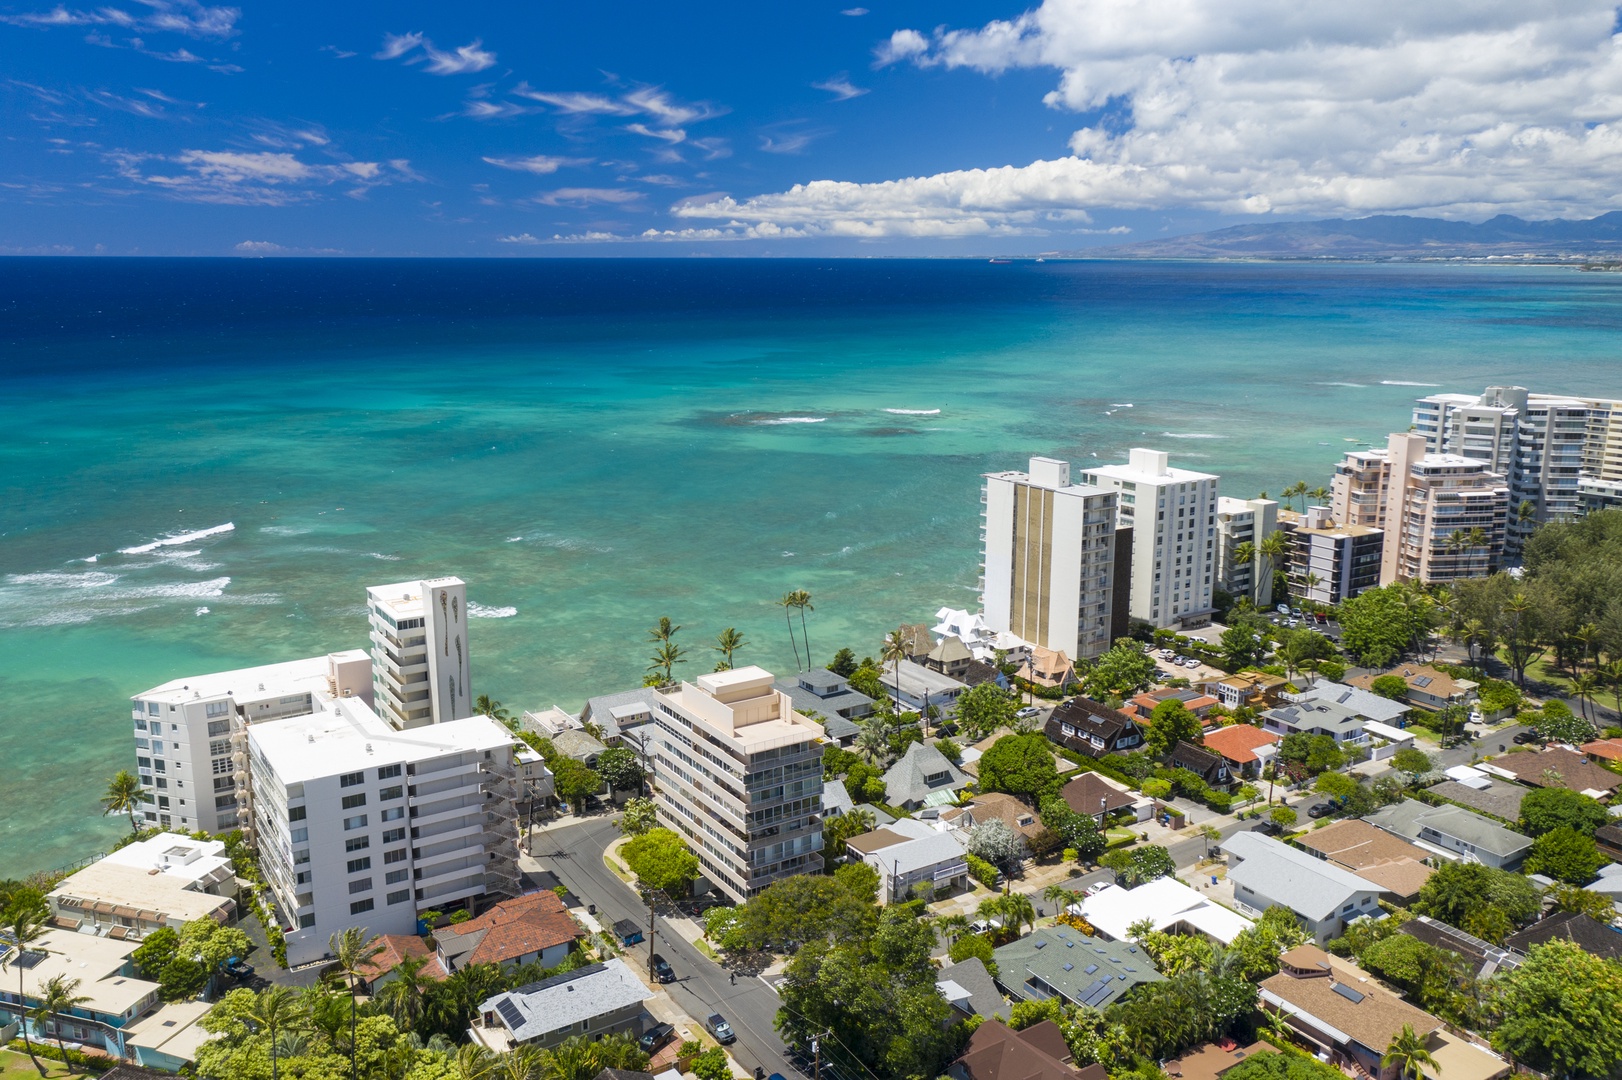 Honolulu Vacation Rentals, Diamond Head Surf House - Another aerial view of the neighborhood.